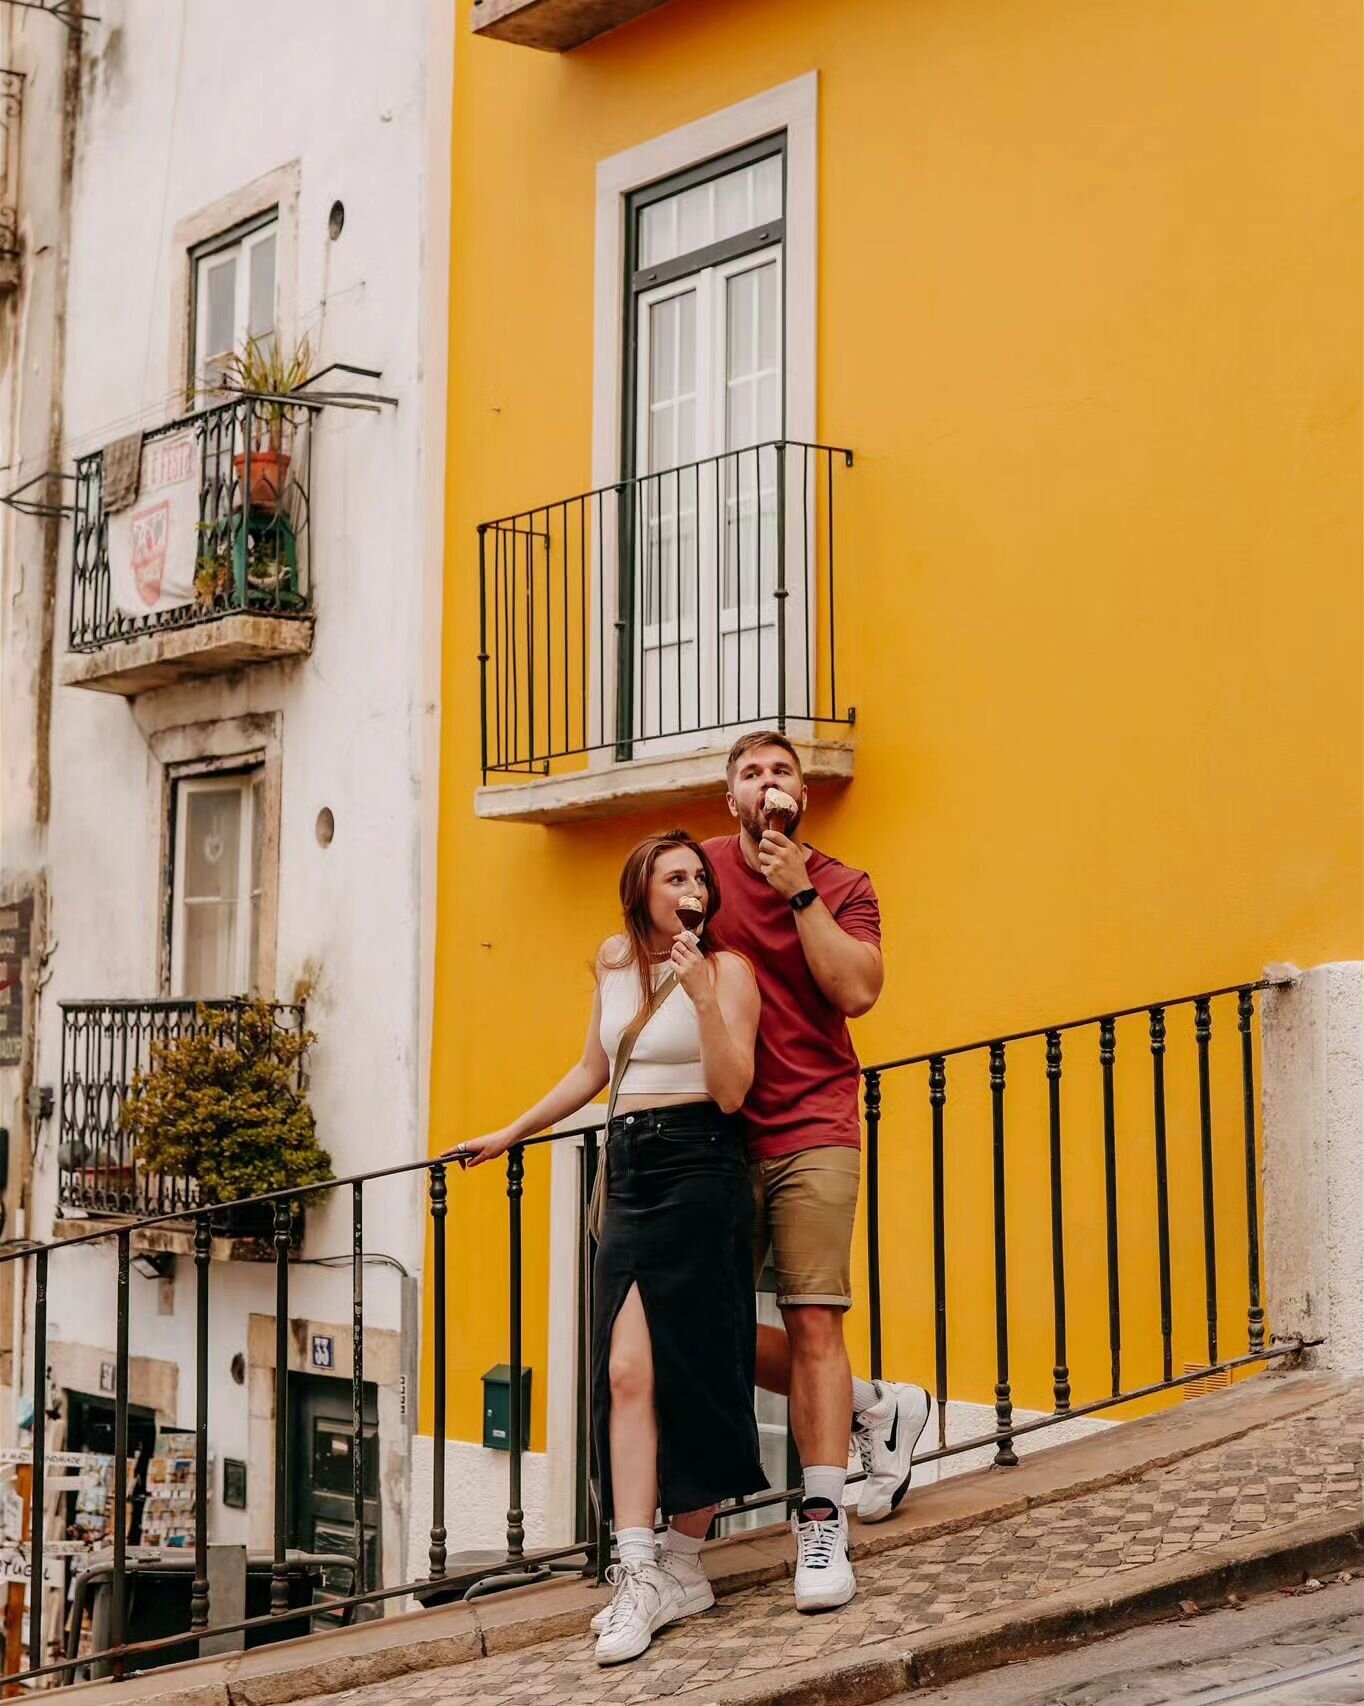 Since I shared the session I did in Japan, I figured I should share the one I did in Lisbon with my friends who live there, @brennalouisephoto and @chiquentenderz! 💛 We only had 1 day of overlap while I was visiting and before Brenna and Arron were 